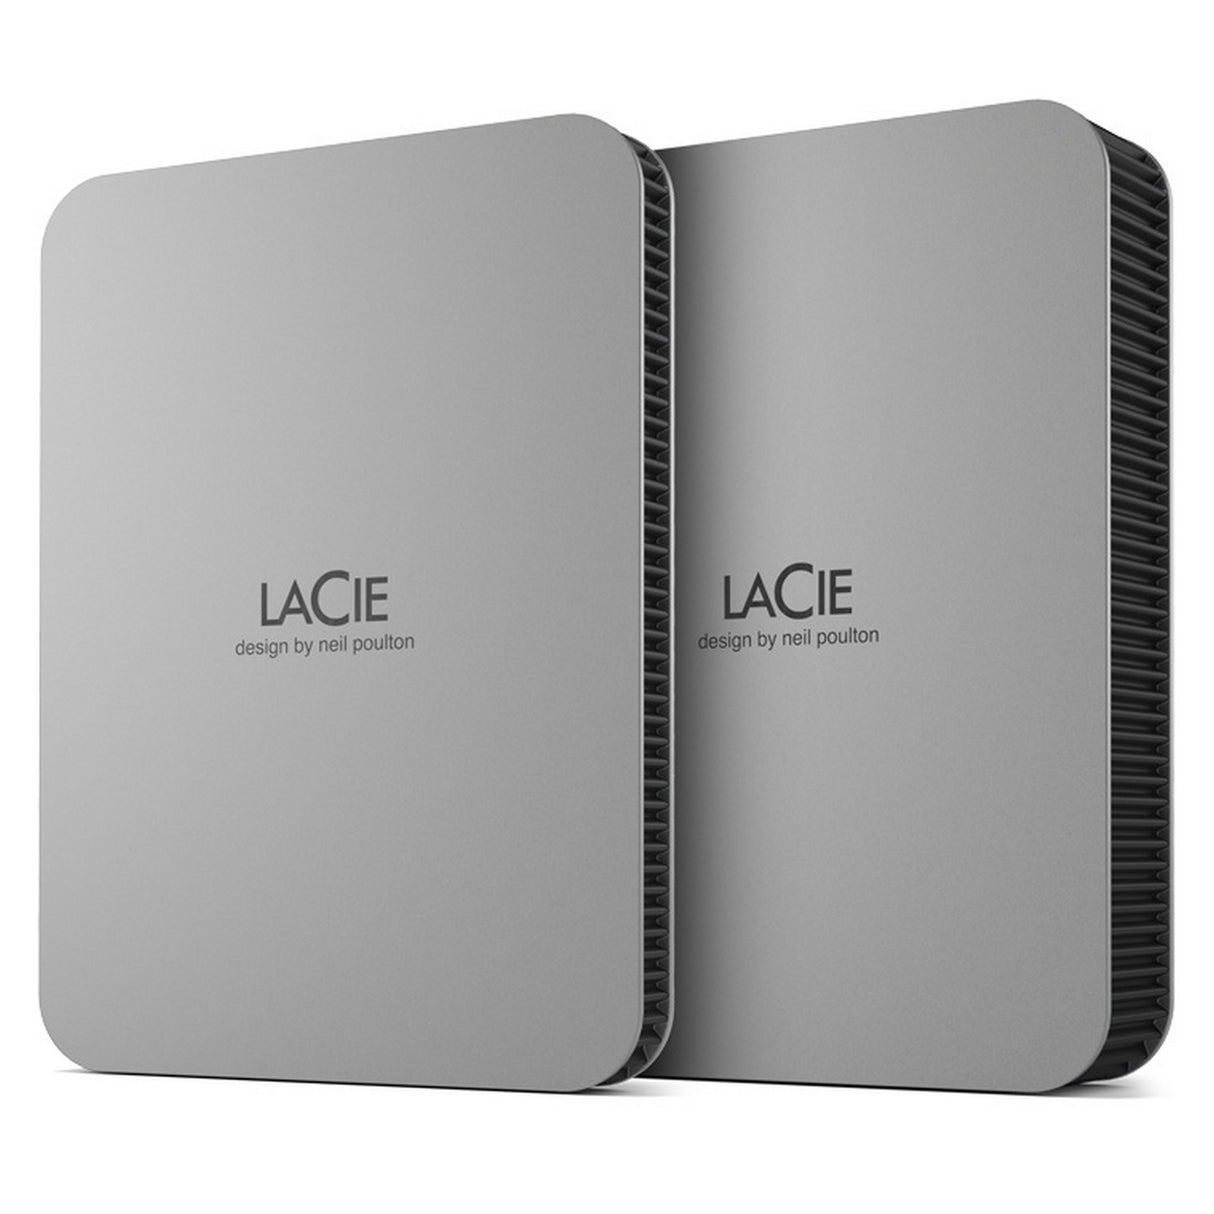 LaCie STLR4000400 Mobile Drive Secure External HDD, 4TB